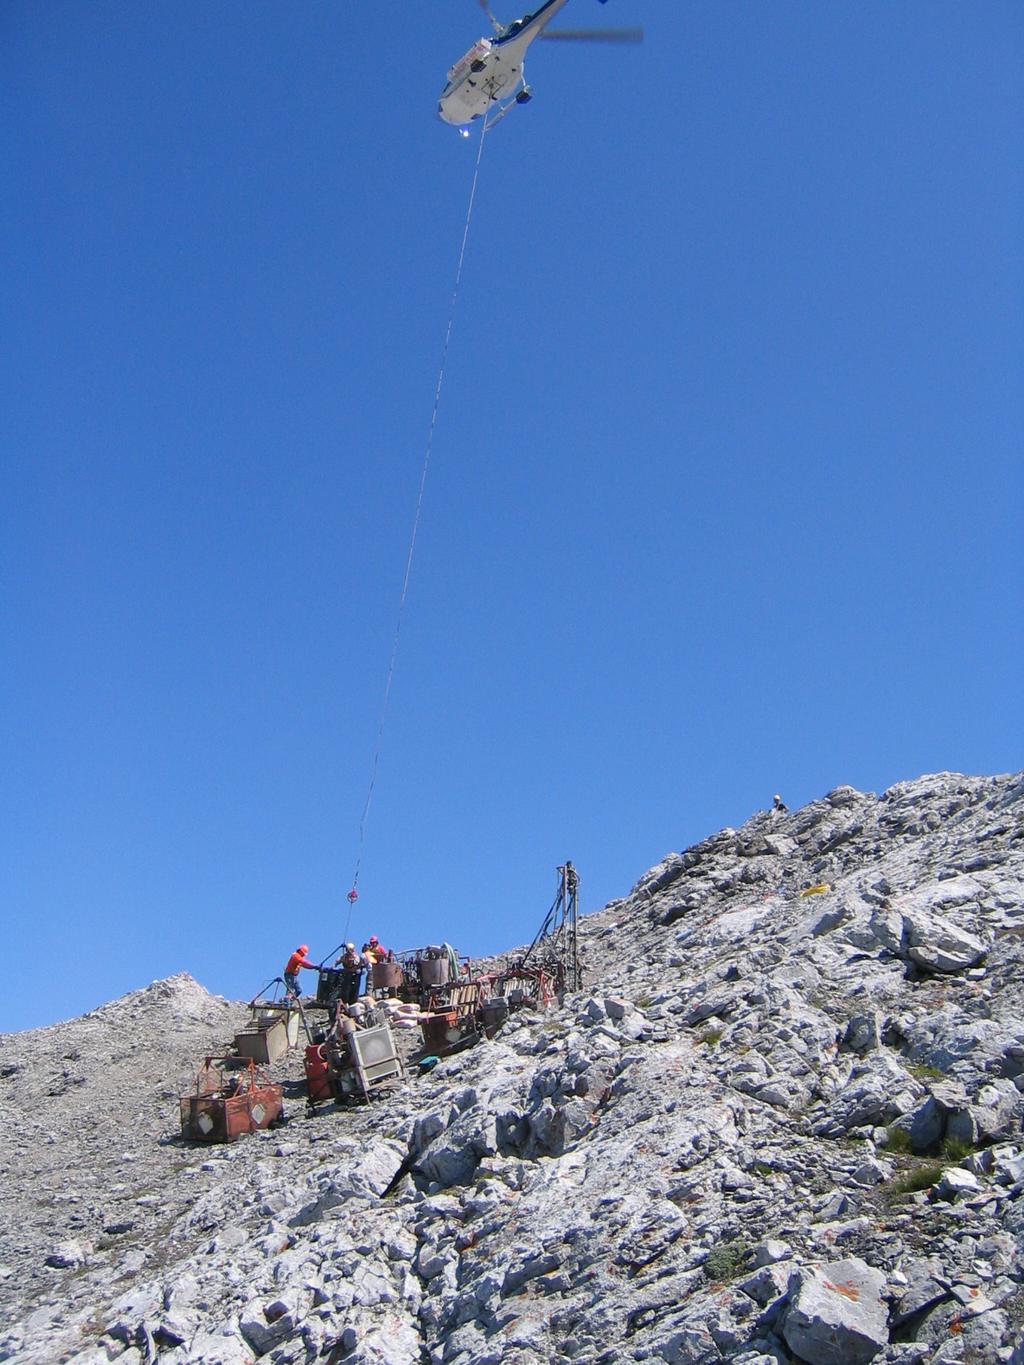 Small remote system installed for reasons of public safety - The system described here is located a high altitude on a remote and inaccessible mountain in Western Canada.